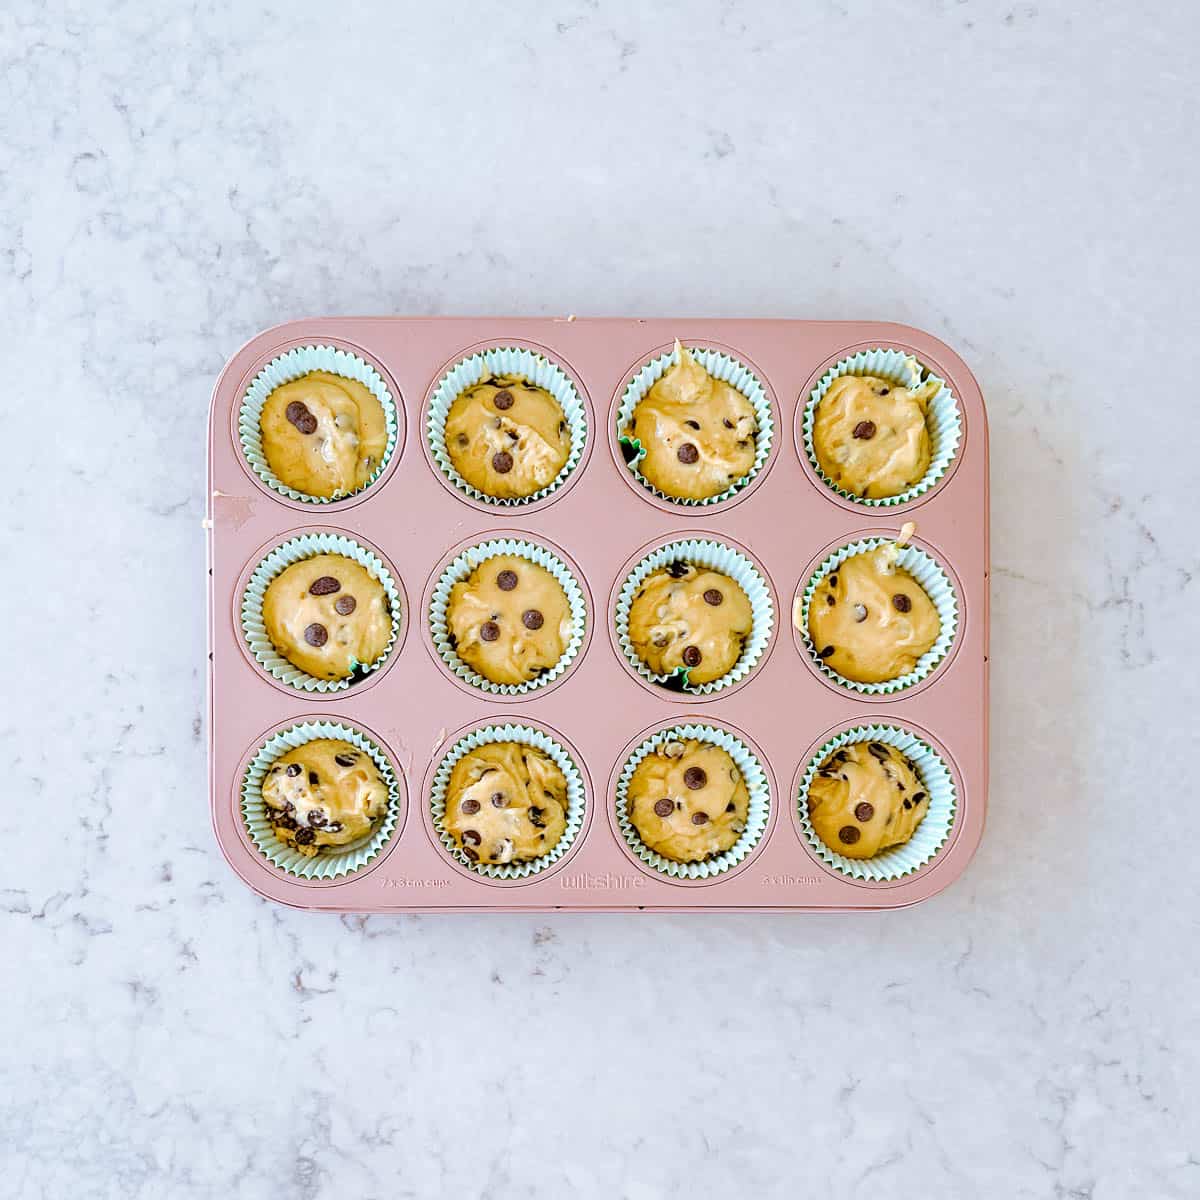 Chocolate chip muffin batter in cases in a 12 hole pink muffin tin.